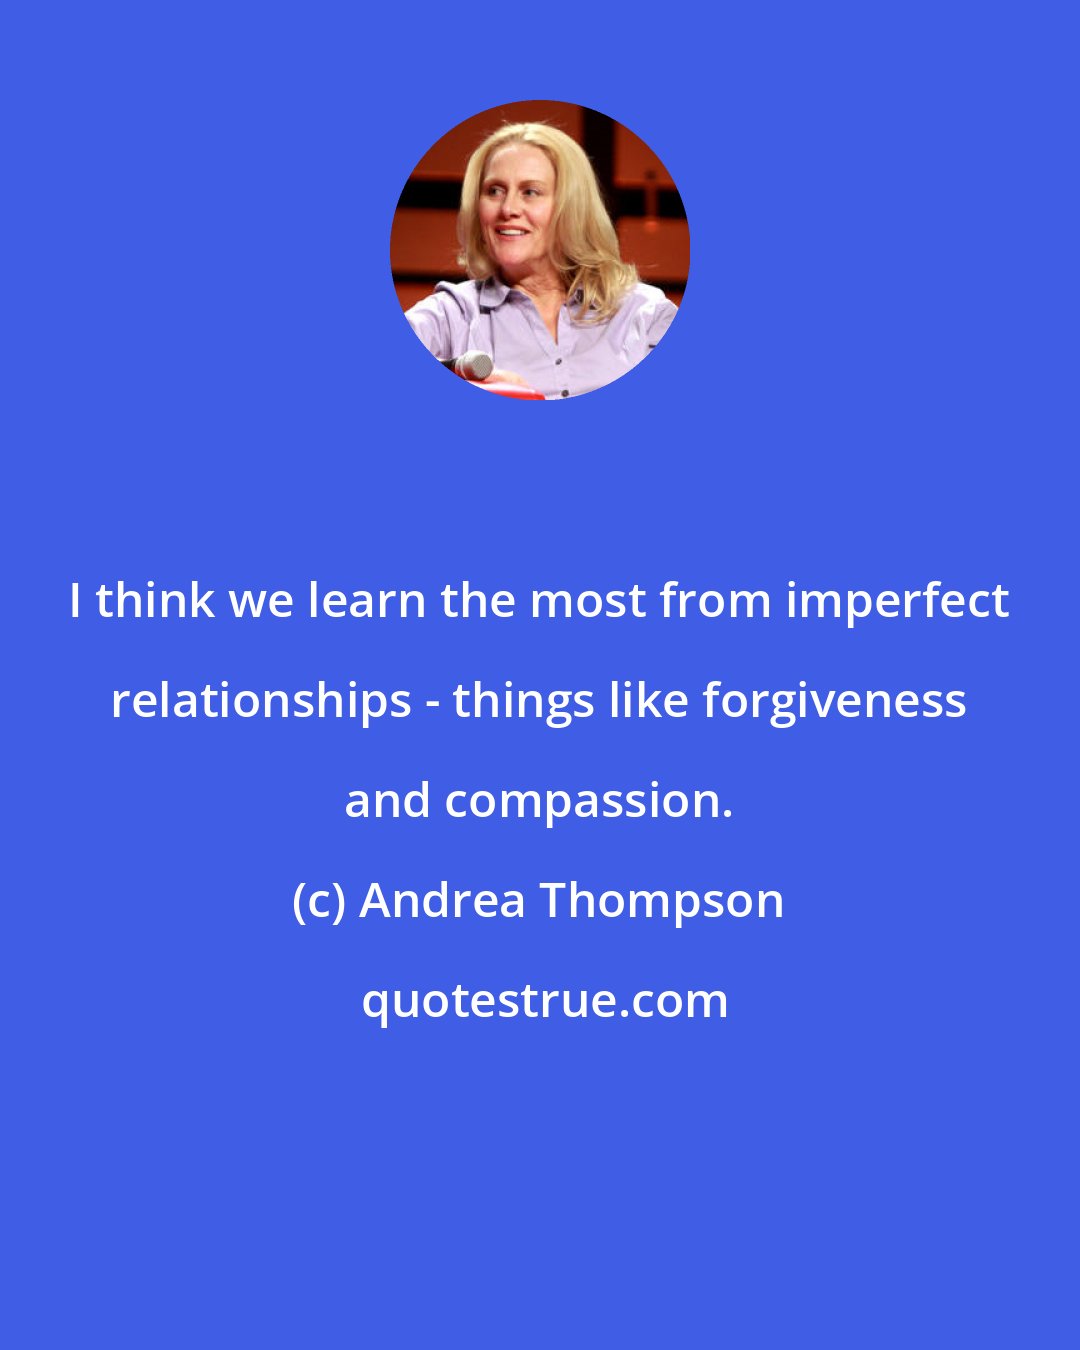 Andrea Thompson: I think we learn the most from imperfect relationships - things like forgiveness and compassion.